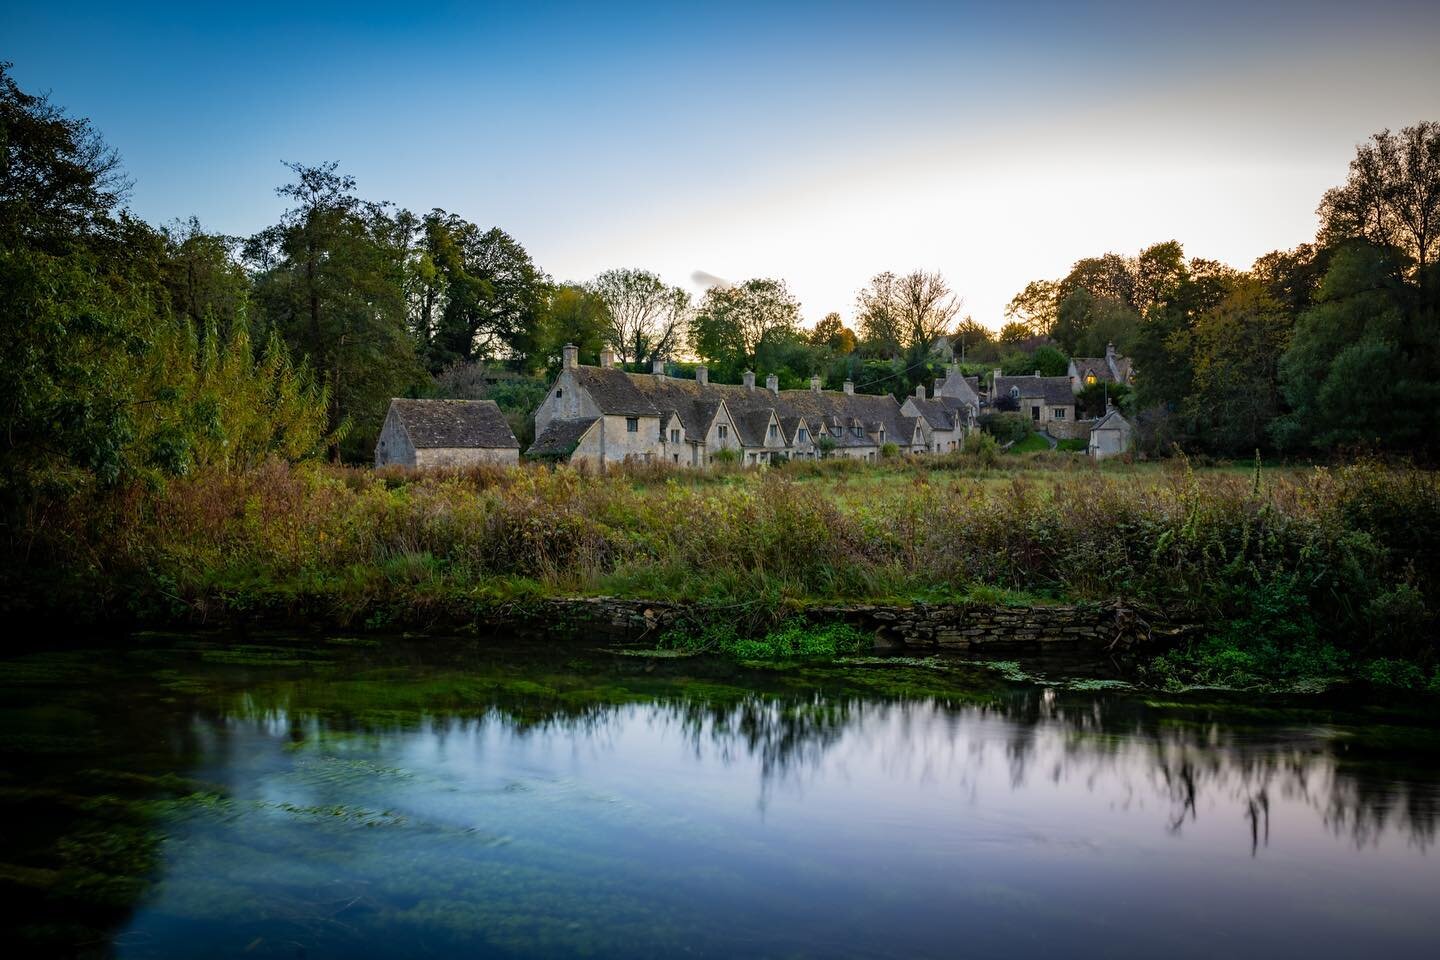 The stunning Arlington Row in Bibury, Gloucestershire - how I would love to own one of these cottages, but not sure I would like the thousands of tourists peeking through my windows!! Glad I found a quiet moment to get the shot! 📷
.
.
.
.
#emmameekp